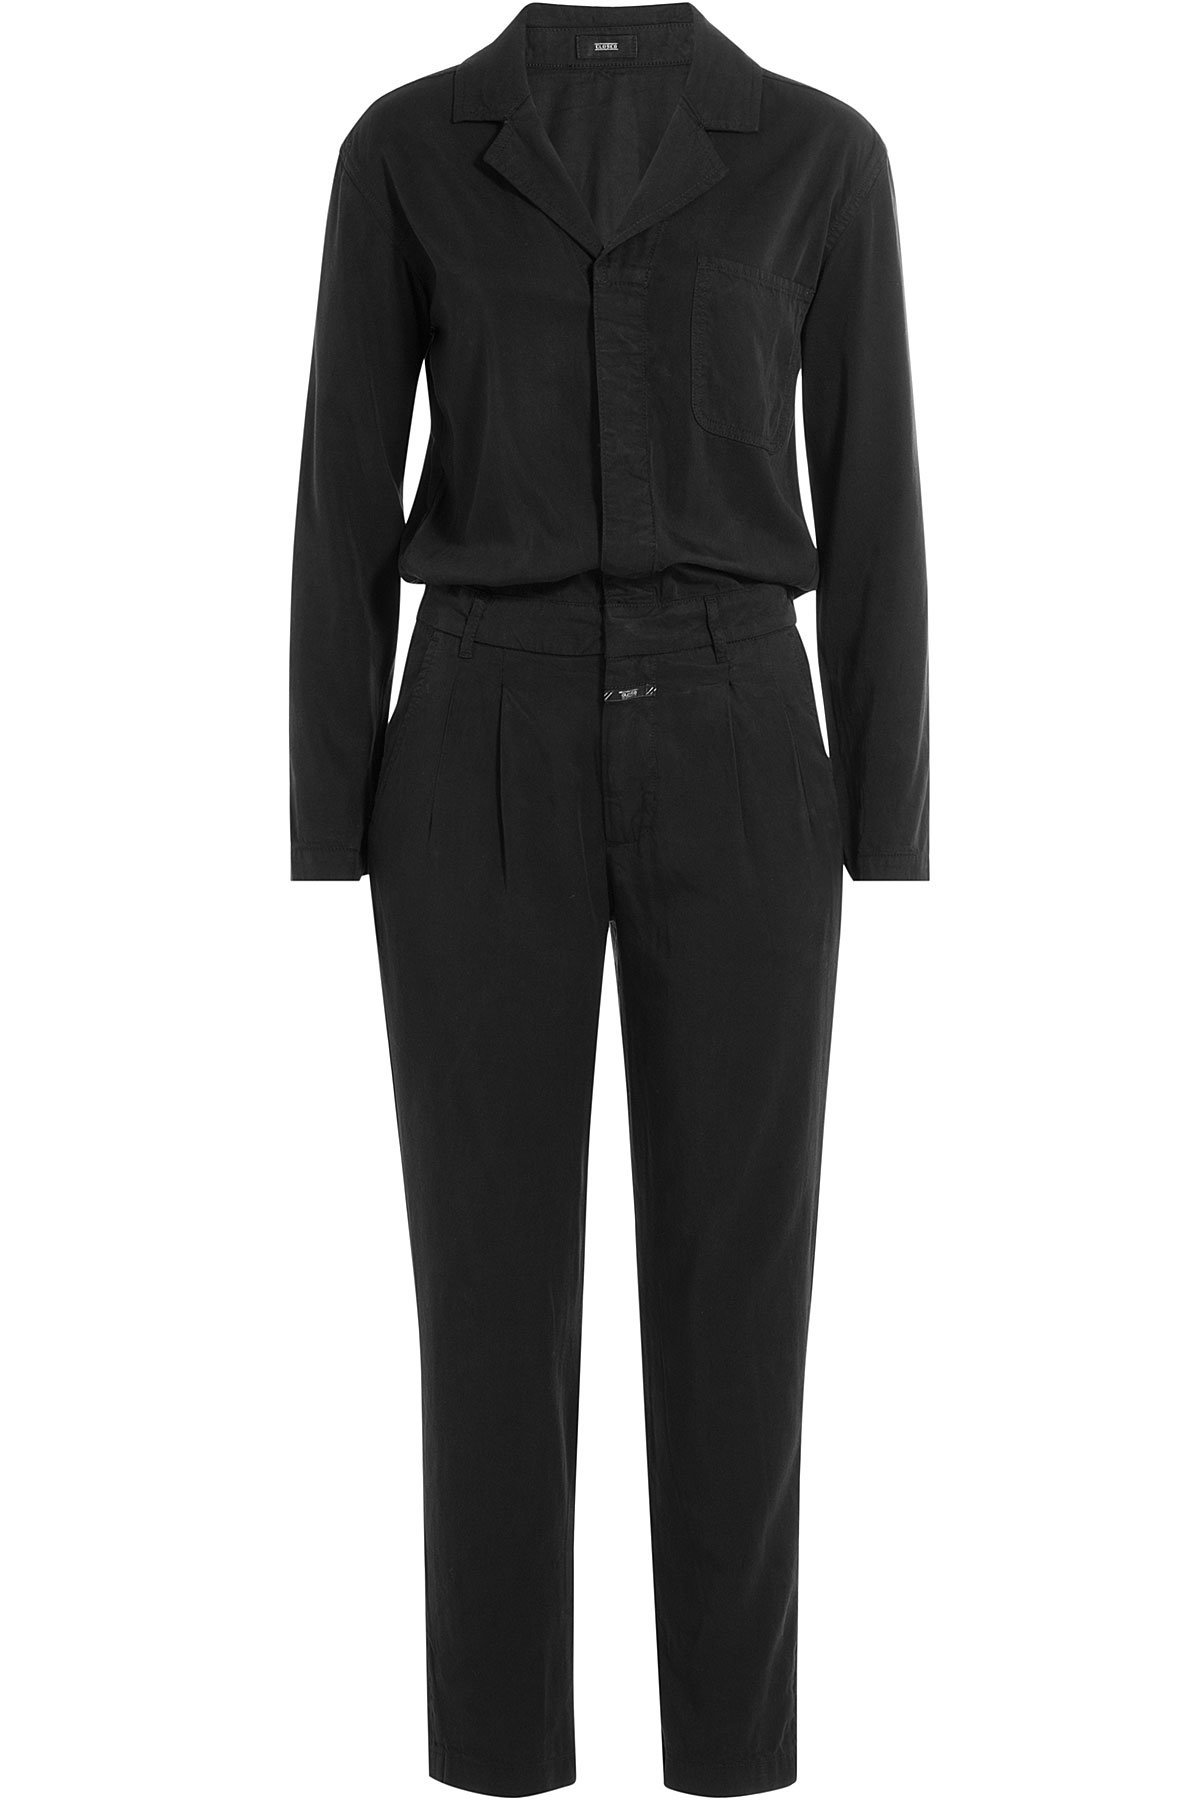 Closed - Jumpsuit with Drawstring Waist